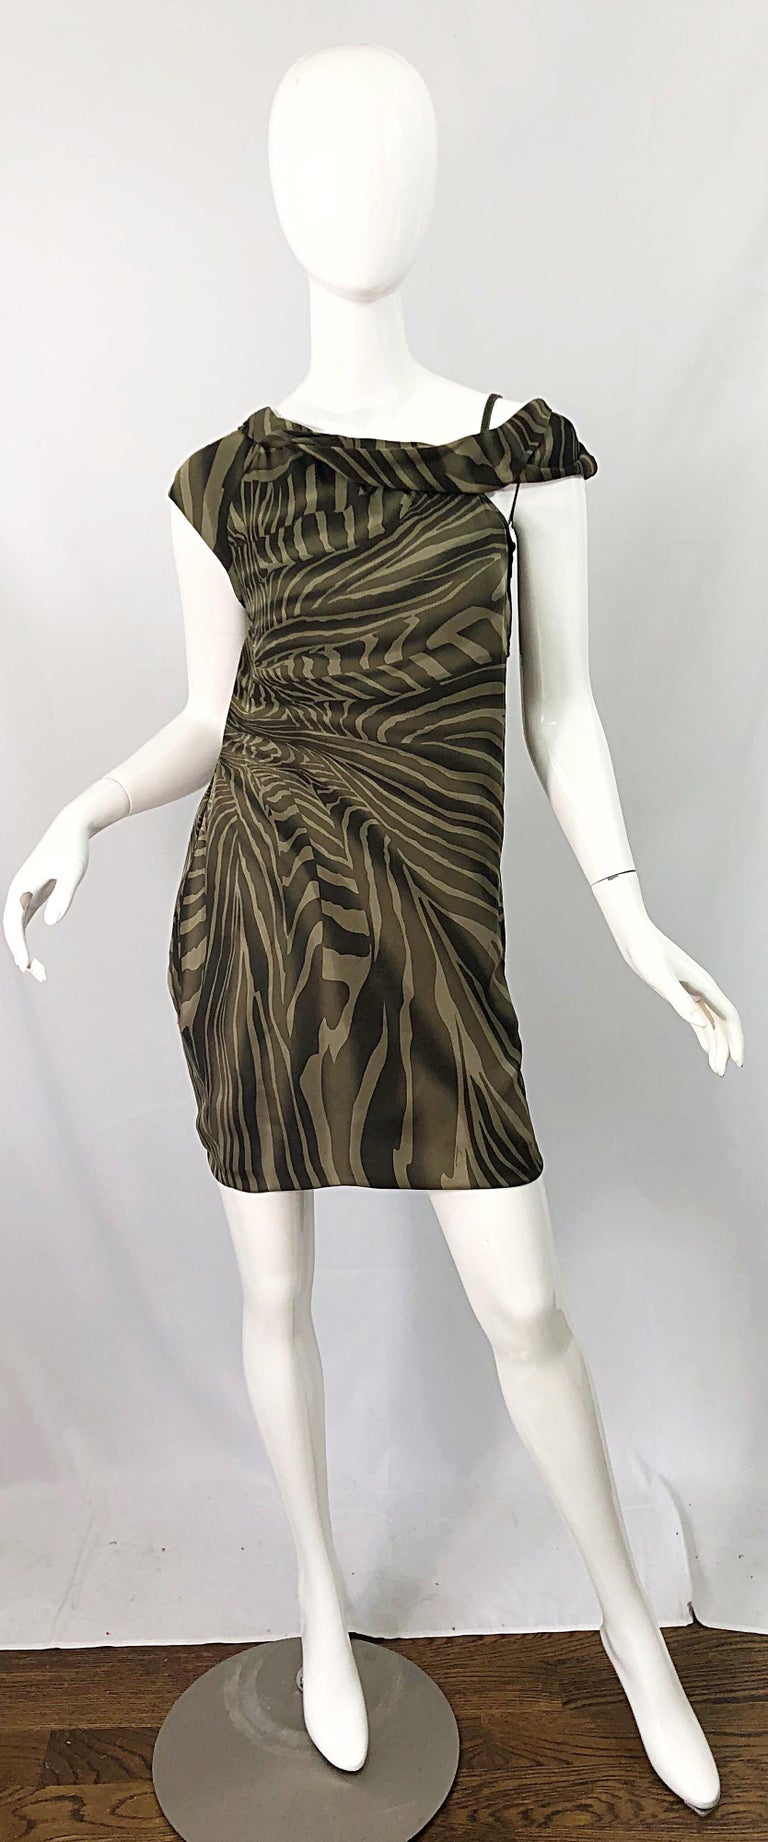 TOM FORD for GUCCI olive green and khaki zebra print silk chiffon and leather asymmetrical off the shoulder dress ! Features adjustable leather strap at top back left shoulder. Hidden zipper up the back with hook-and-eye closure. Very flattering and